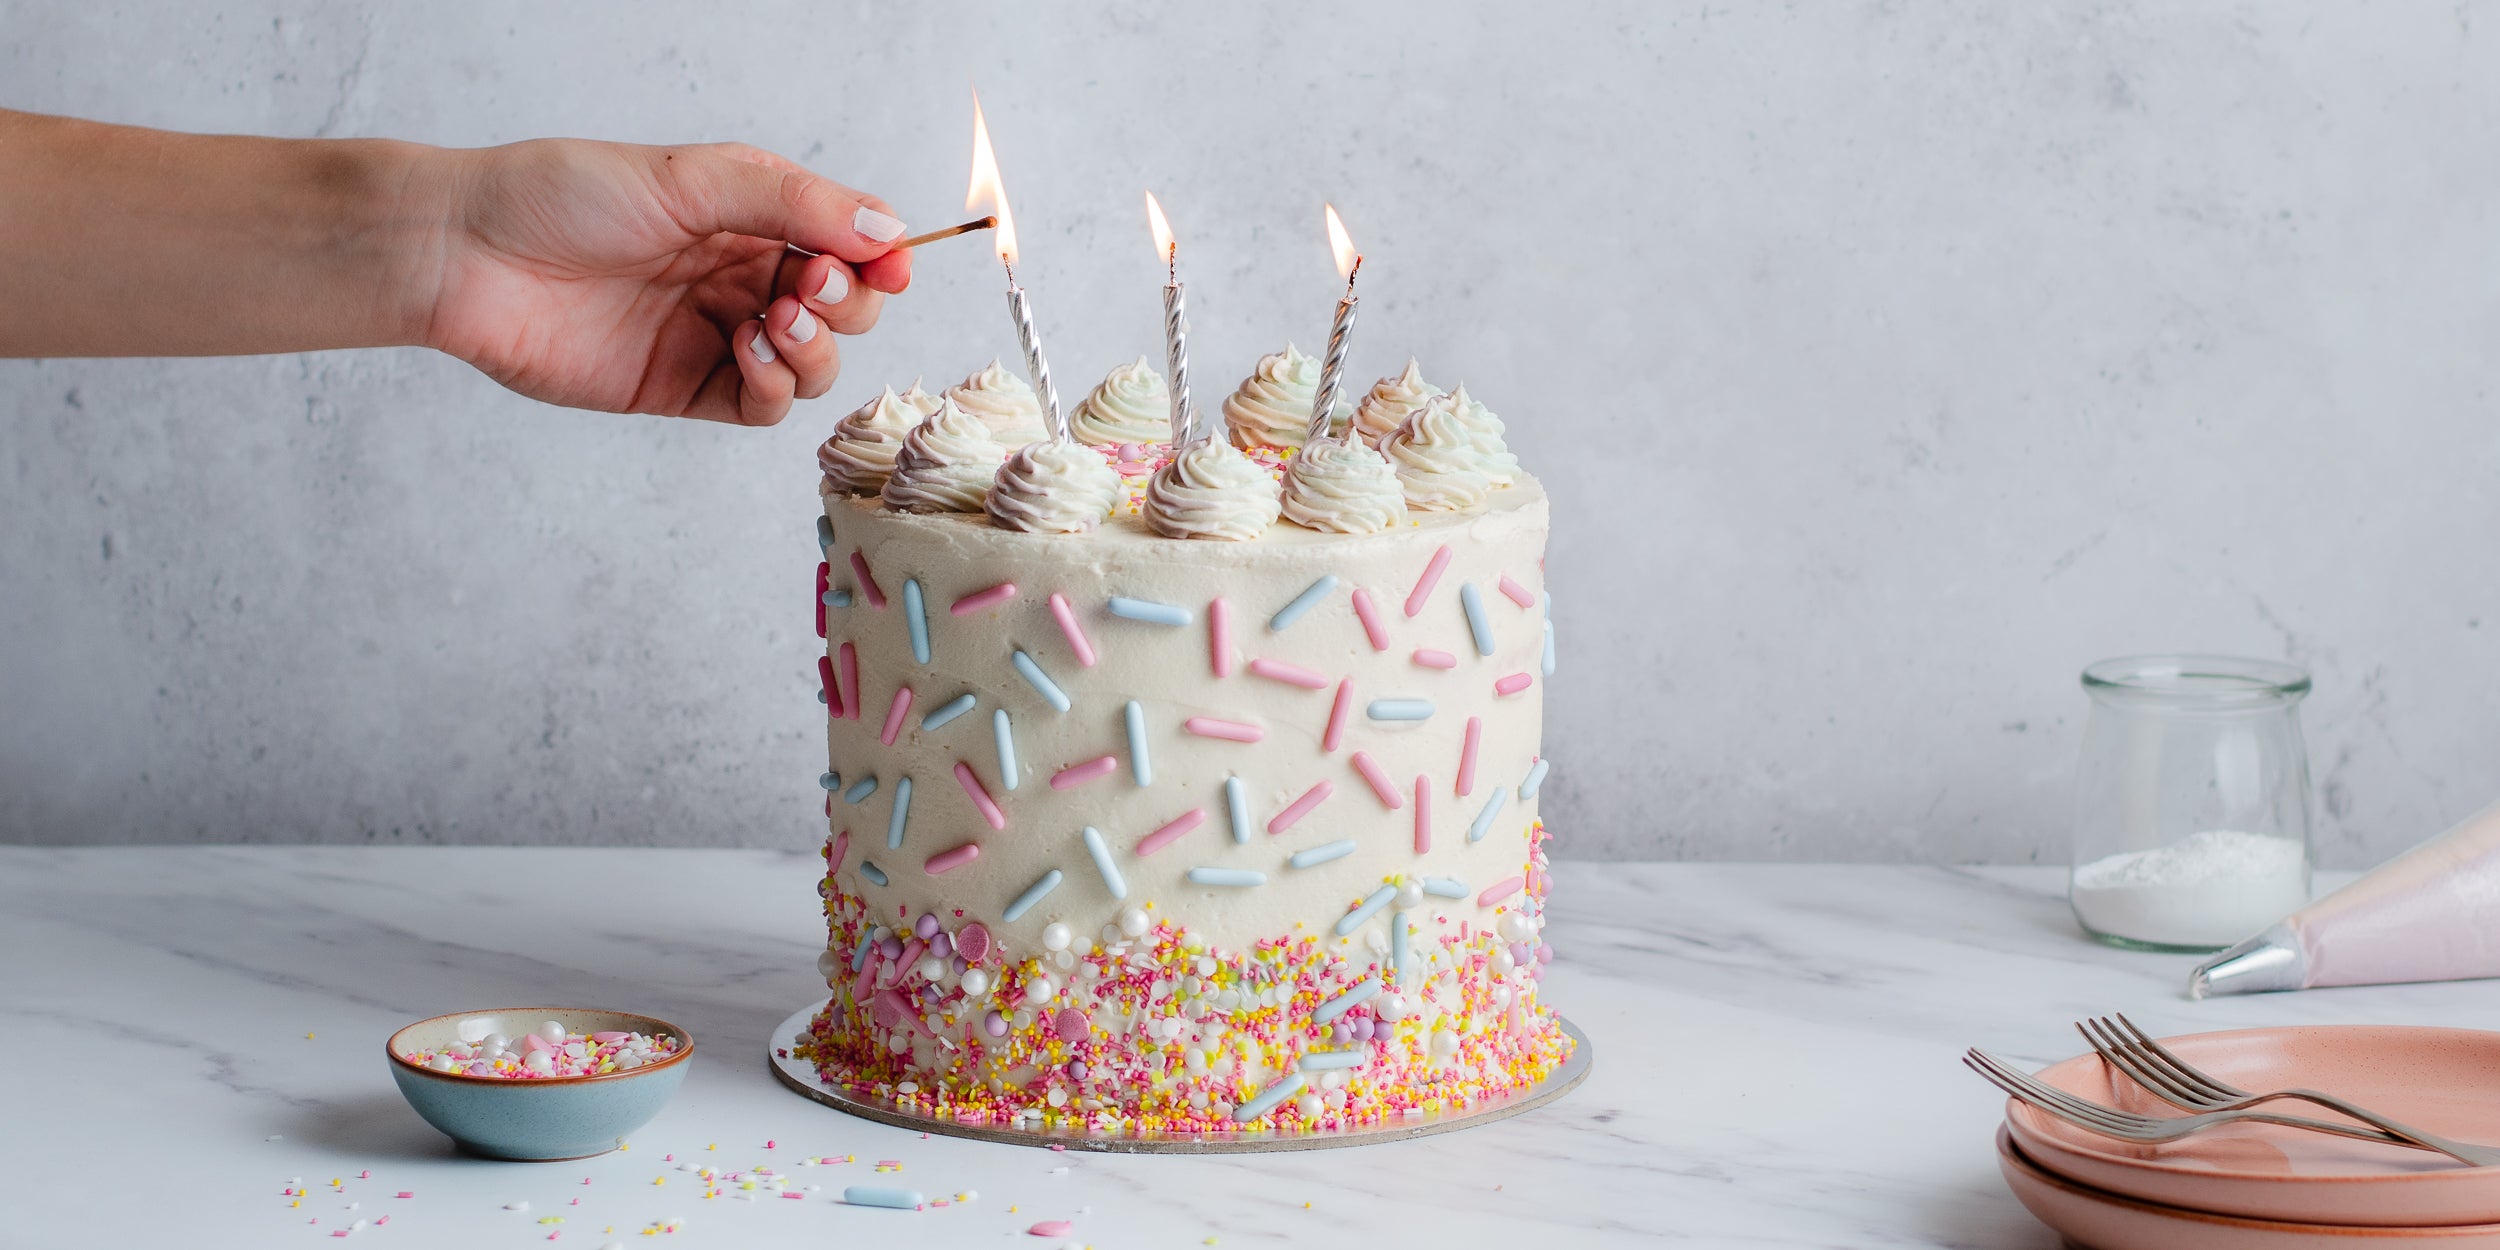 Hand reaching in with a match to light candles on top of white sprinkle covered birthday cake